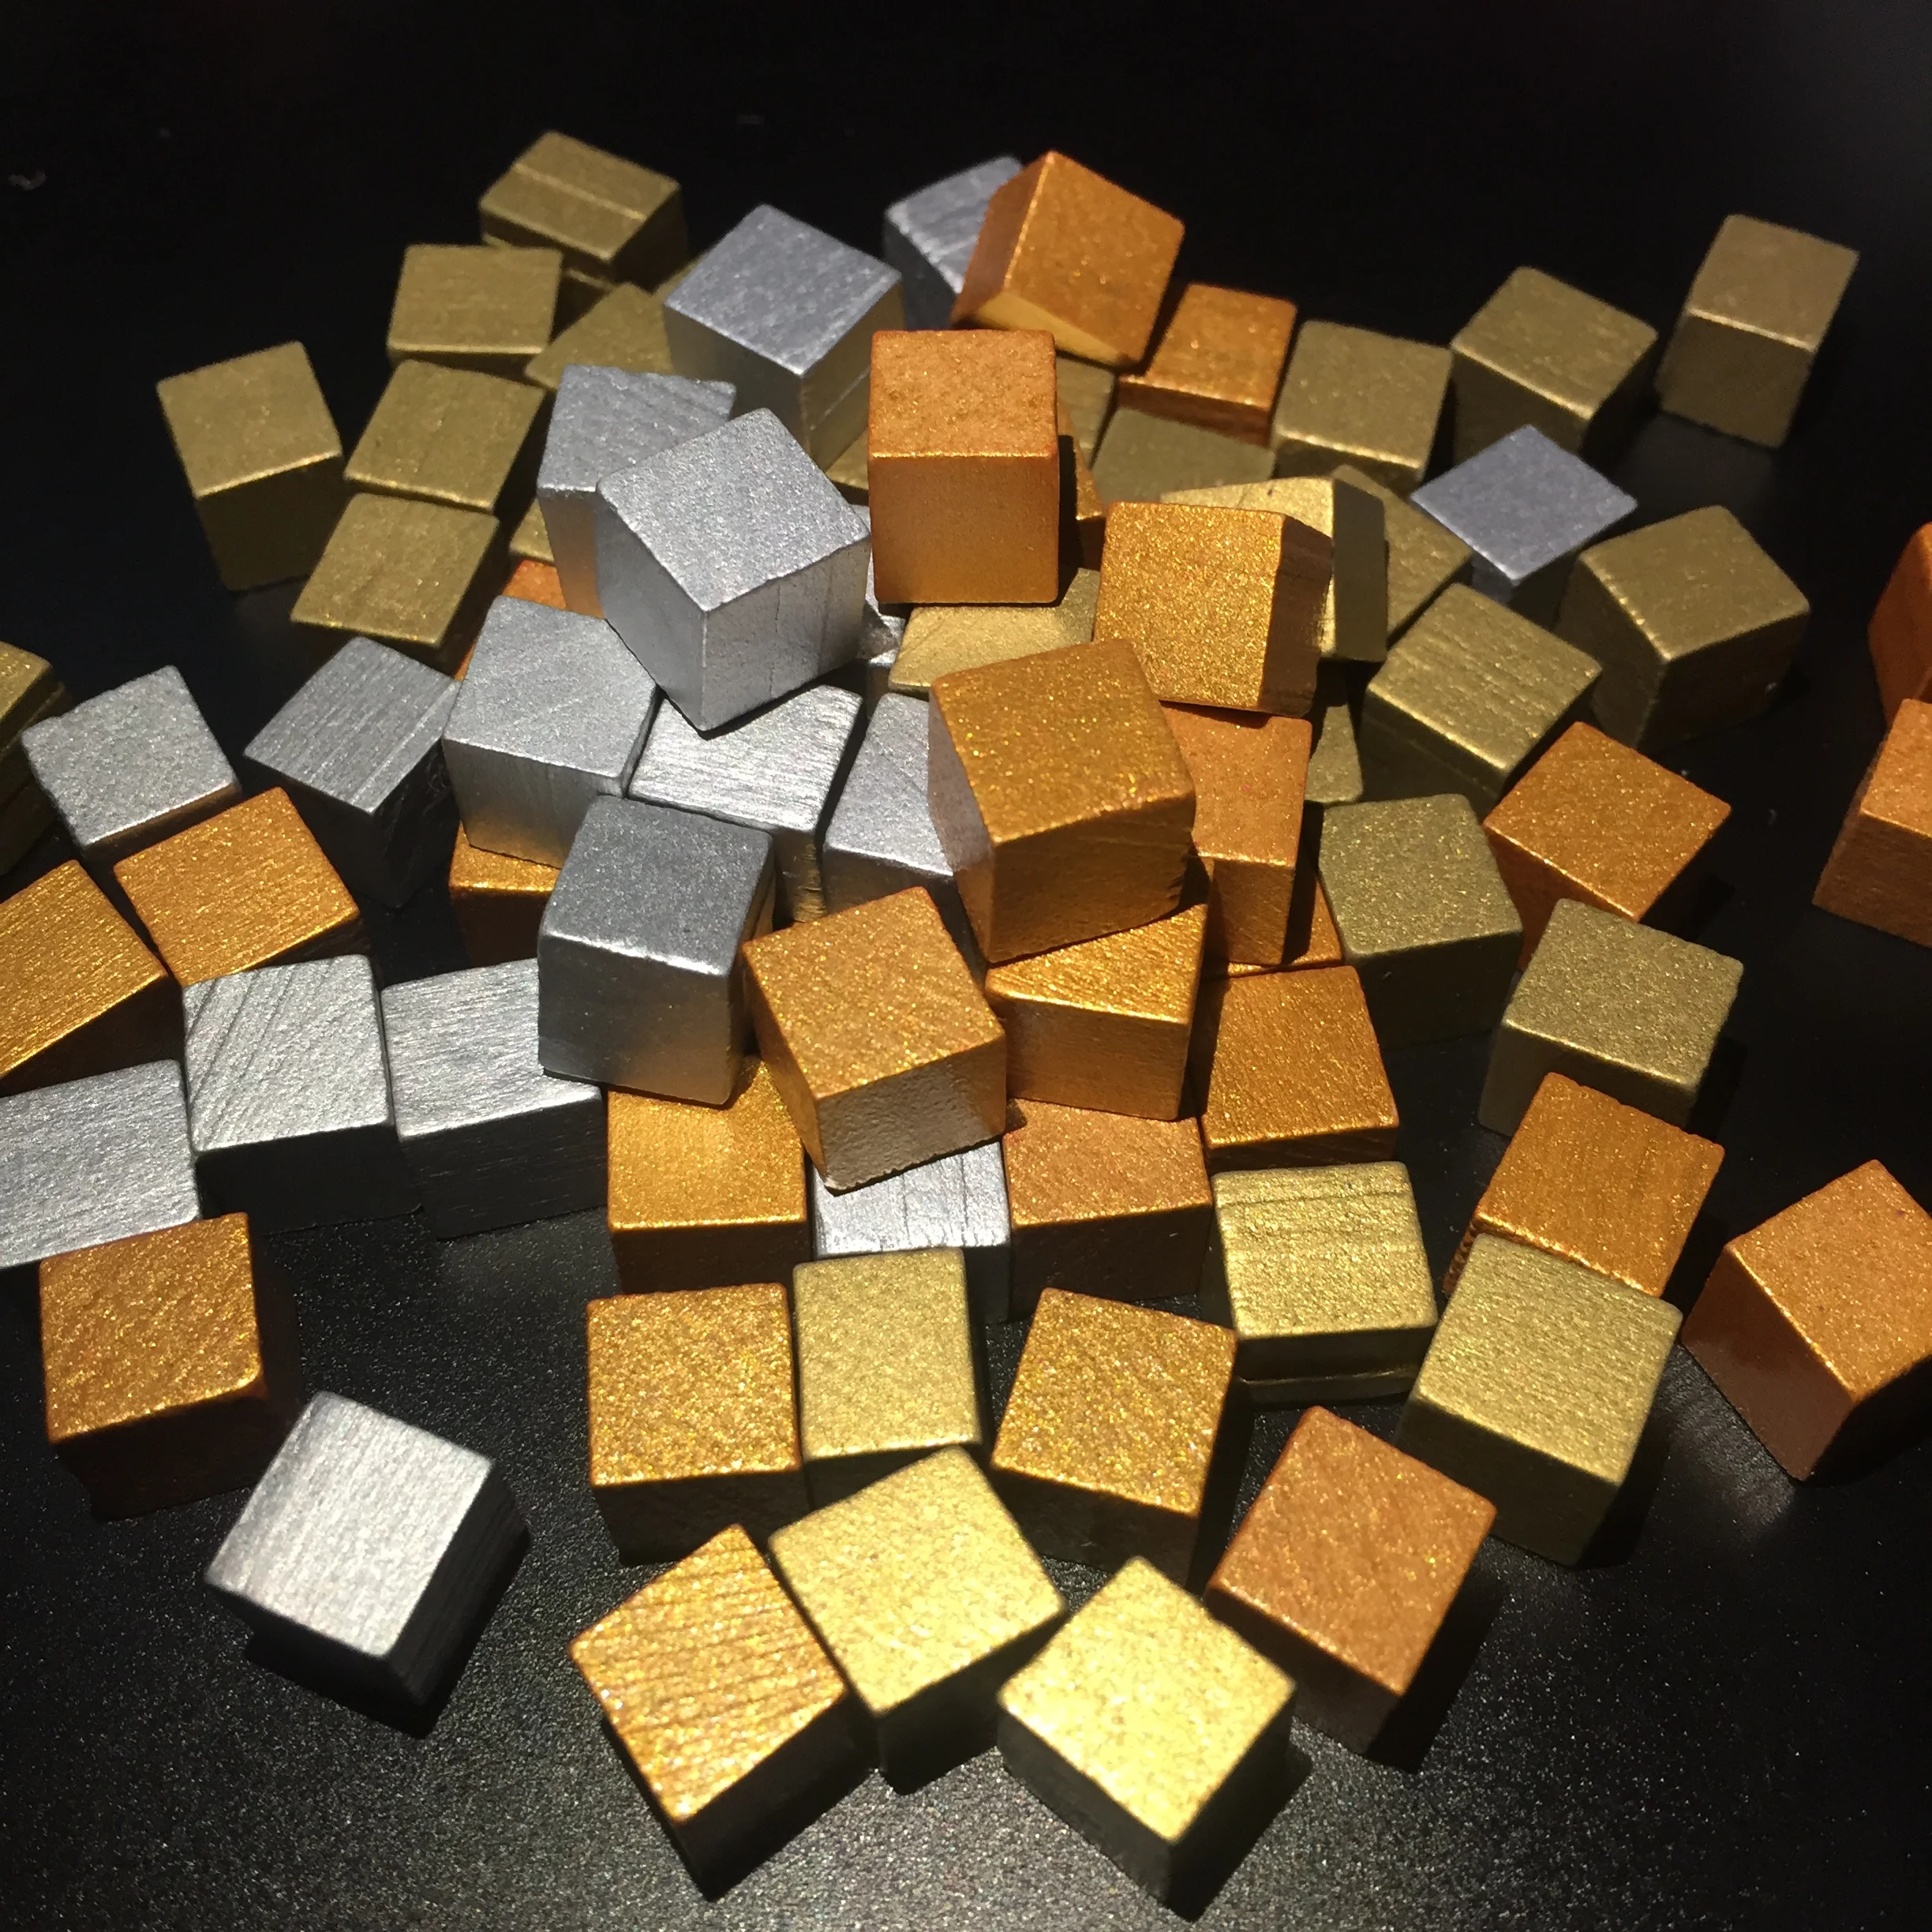 

100Pcs/Set 10mm bronze Gold silver Metal Color Wood Cube Square Corner Dice Chess Piece Right Angle Cubes For Puzzle Board Game